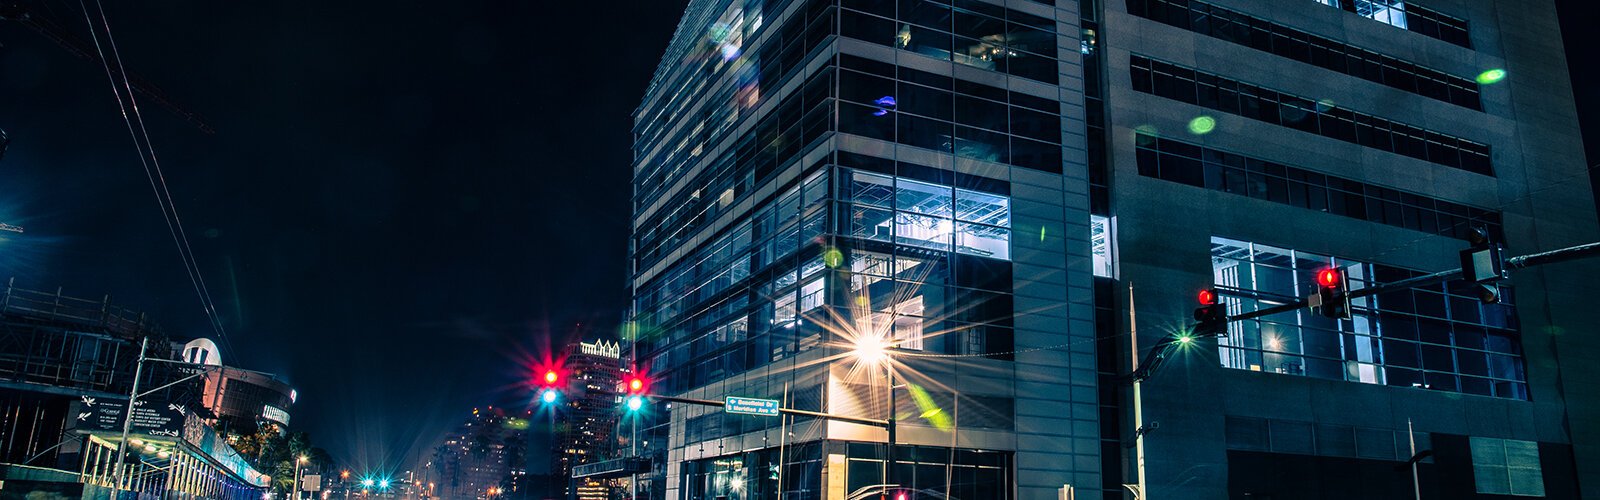 At night the lights of the USF Morsani College of Medicine and Heart Institute shine along Channelside Drive.